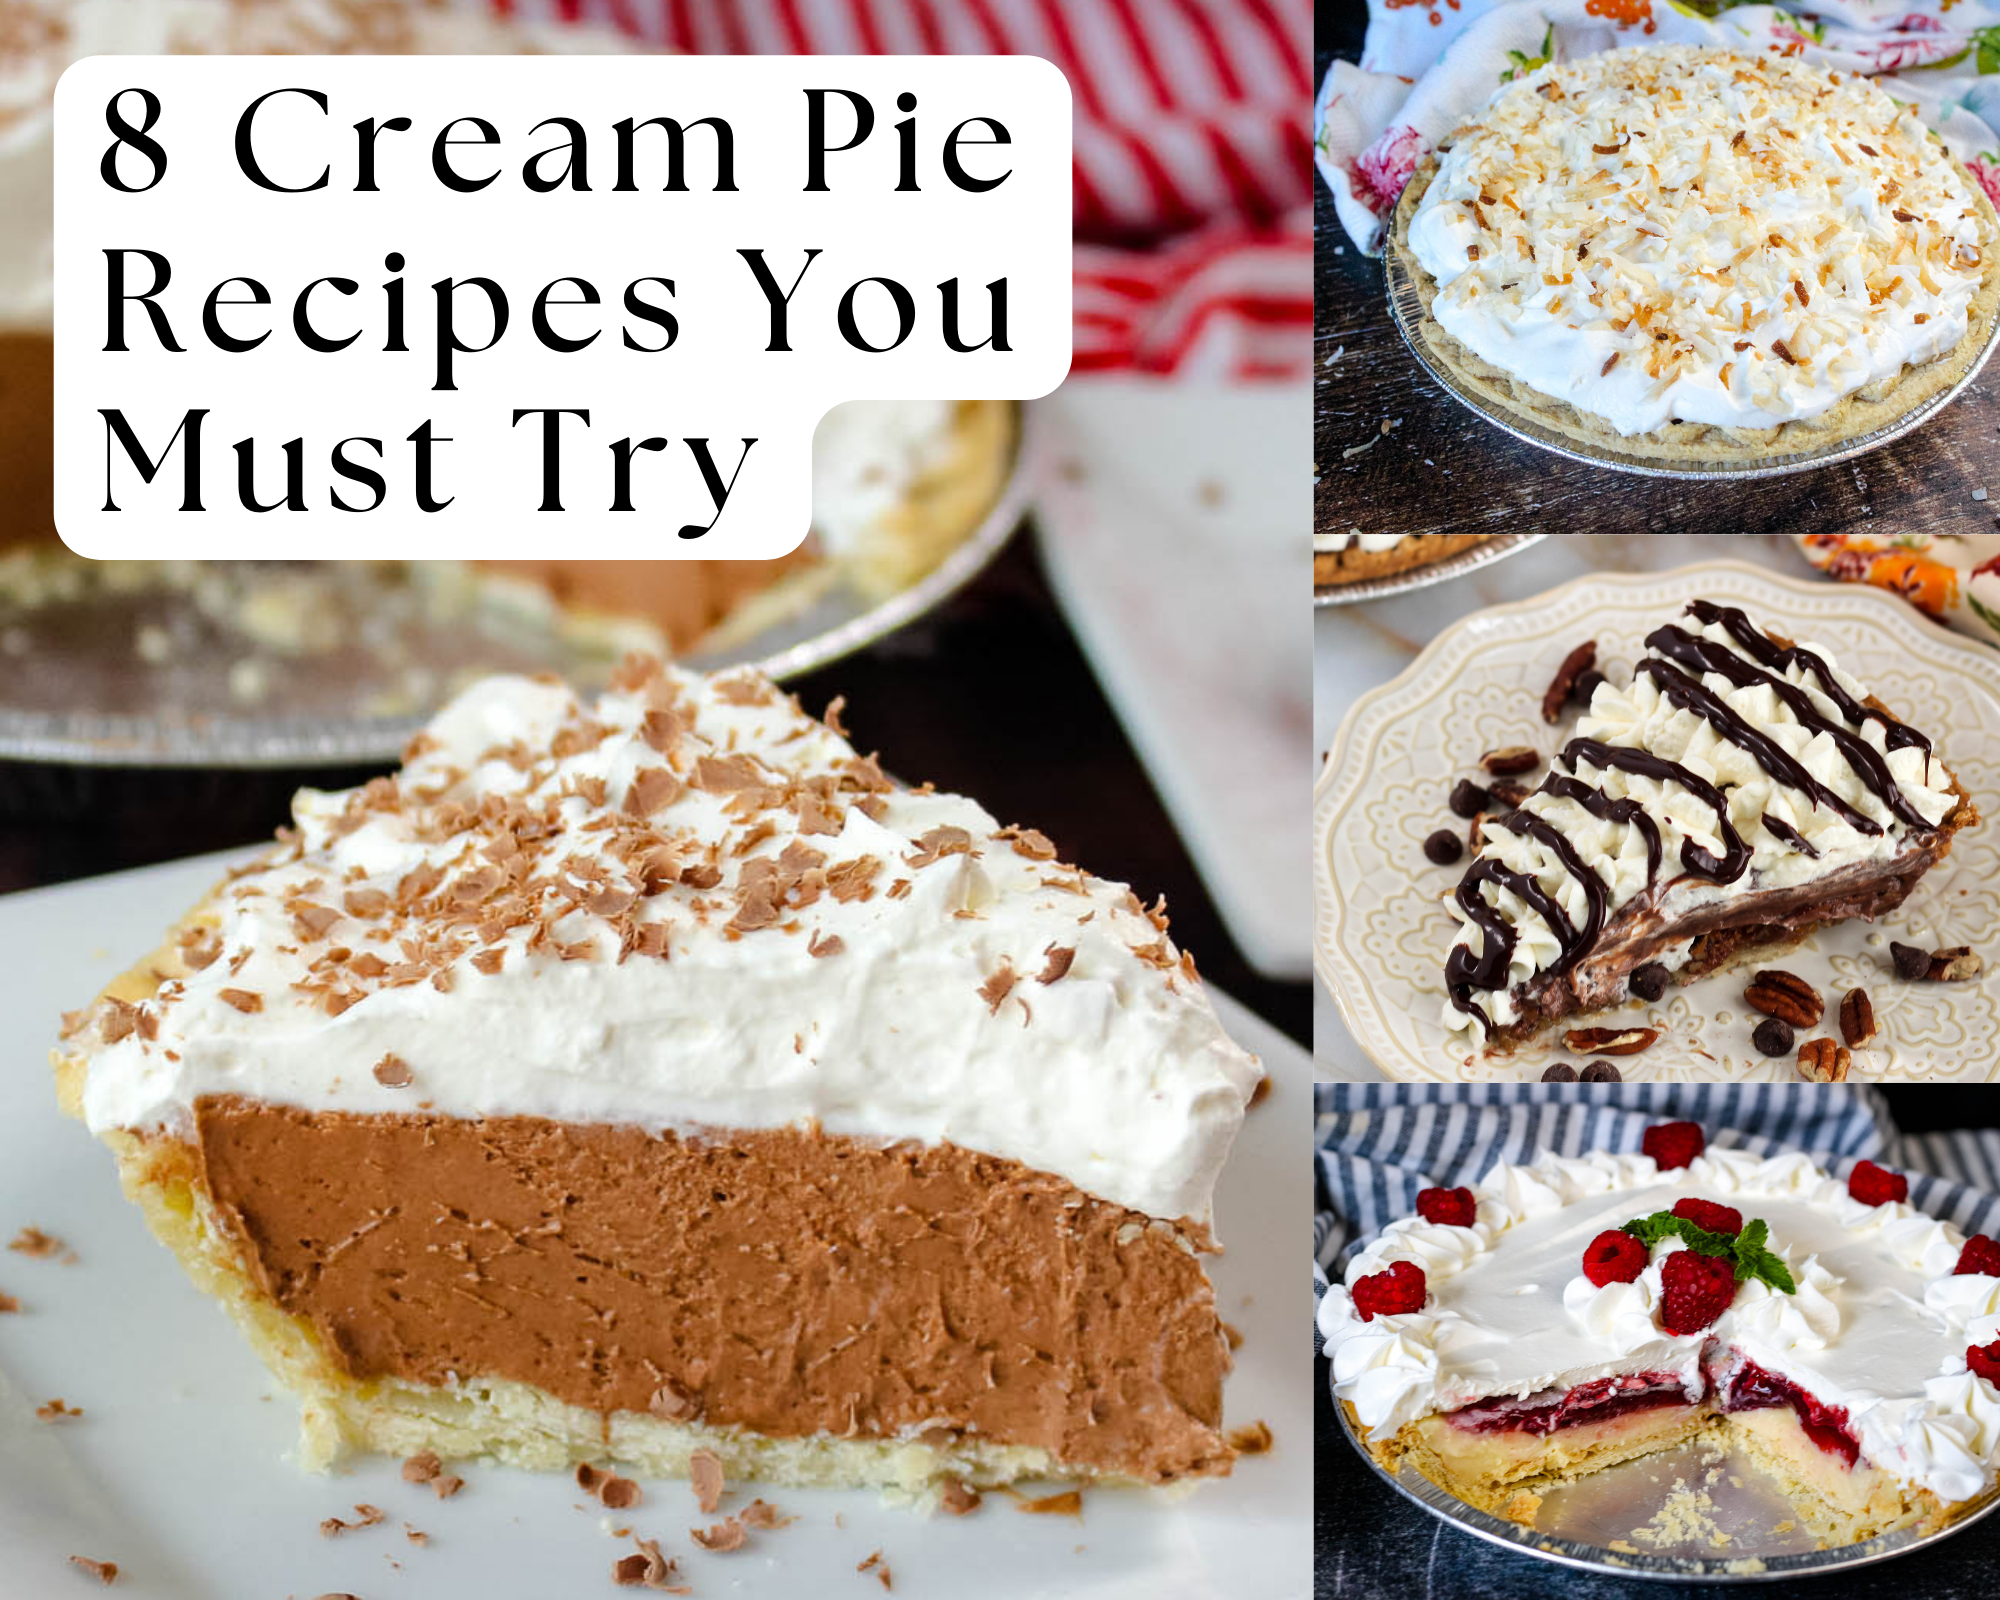 8 Cream Pie Recipes You Must Try